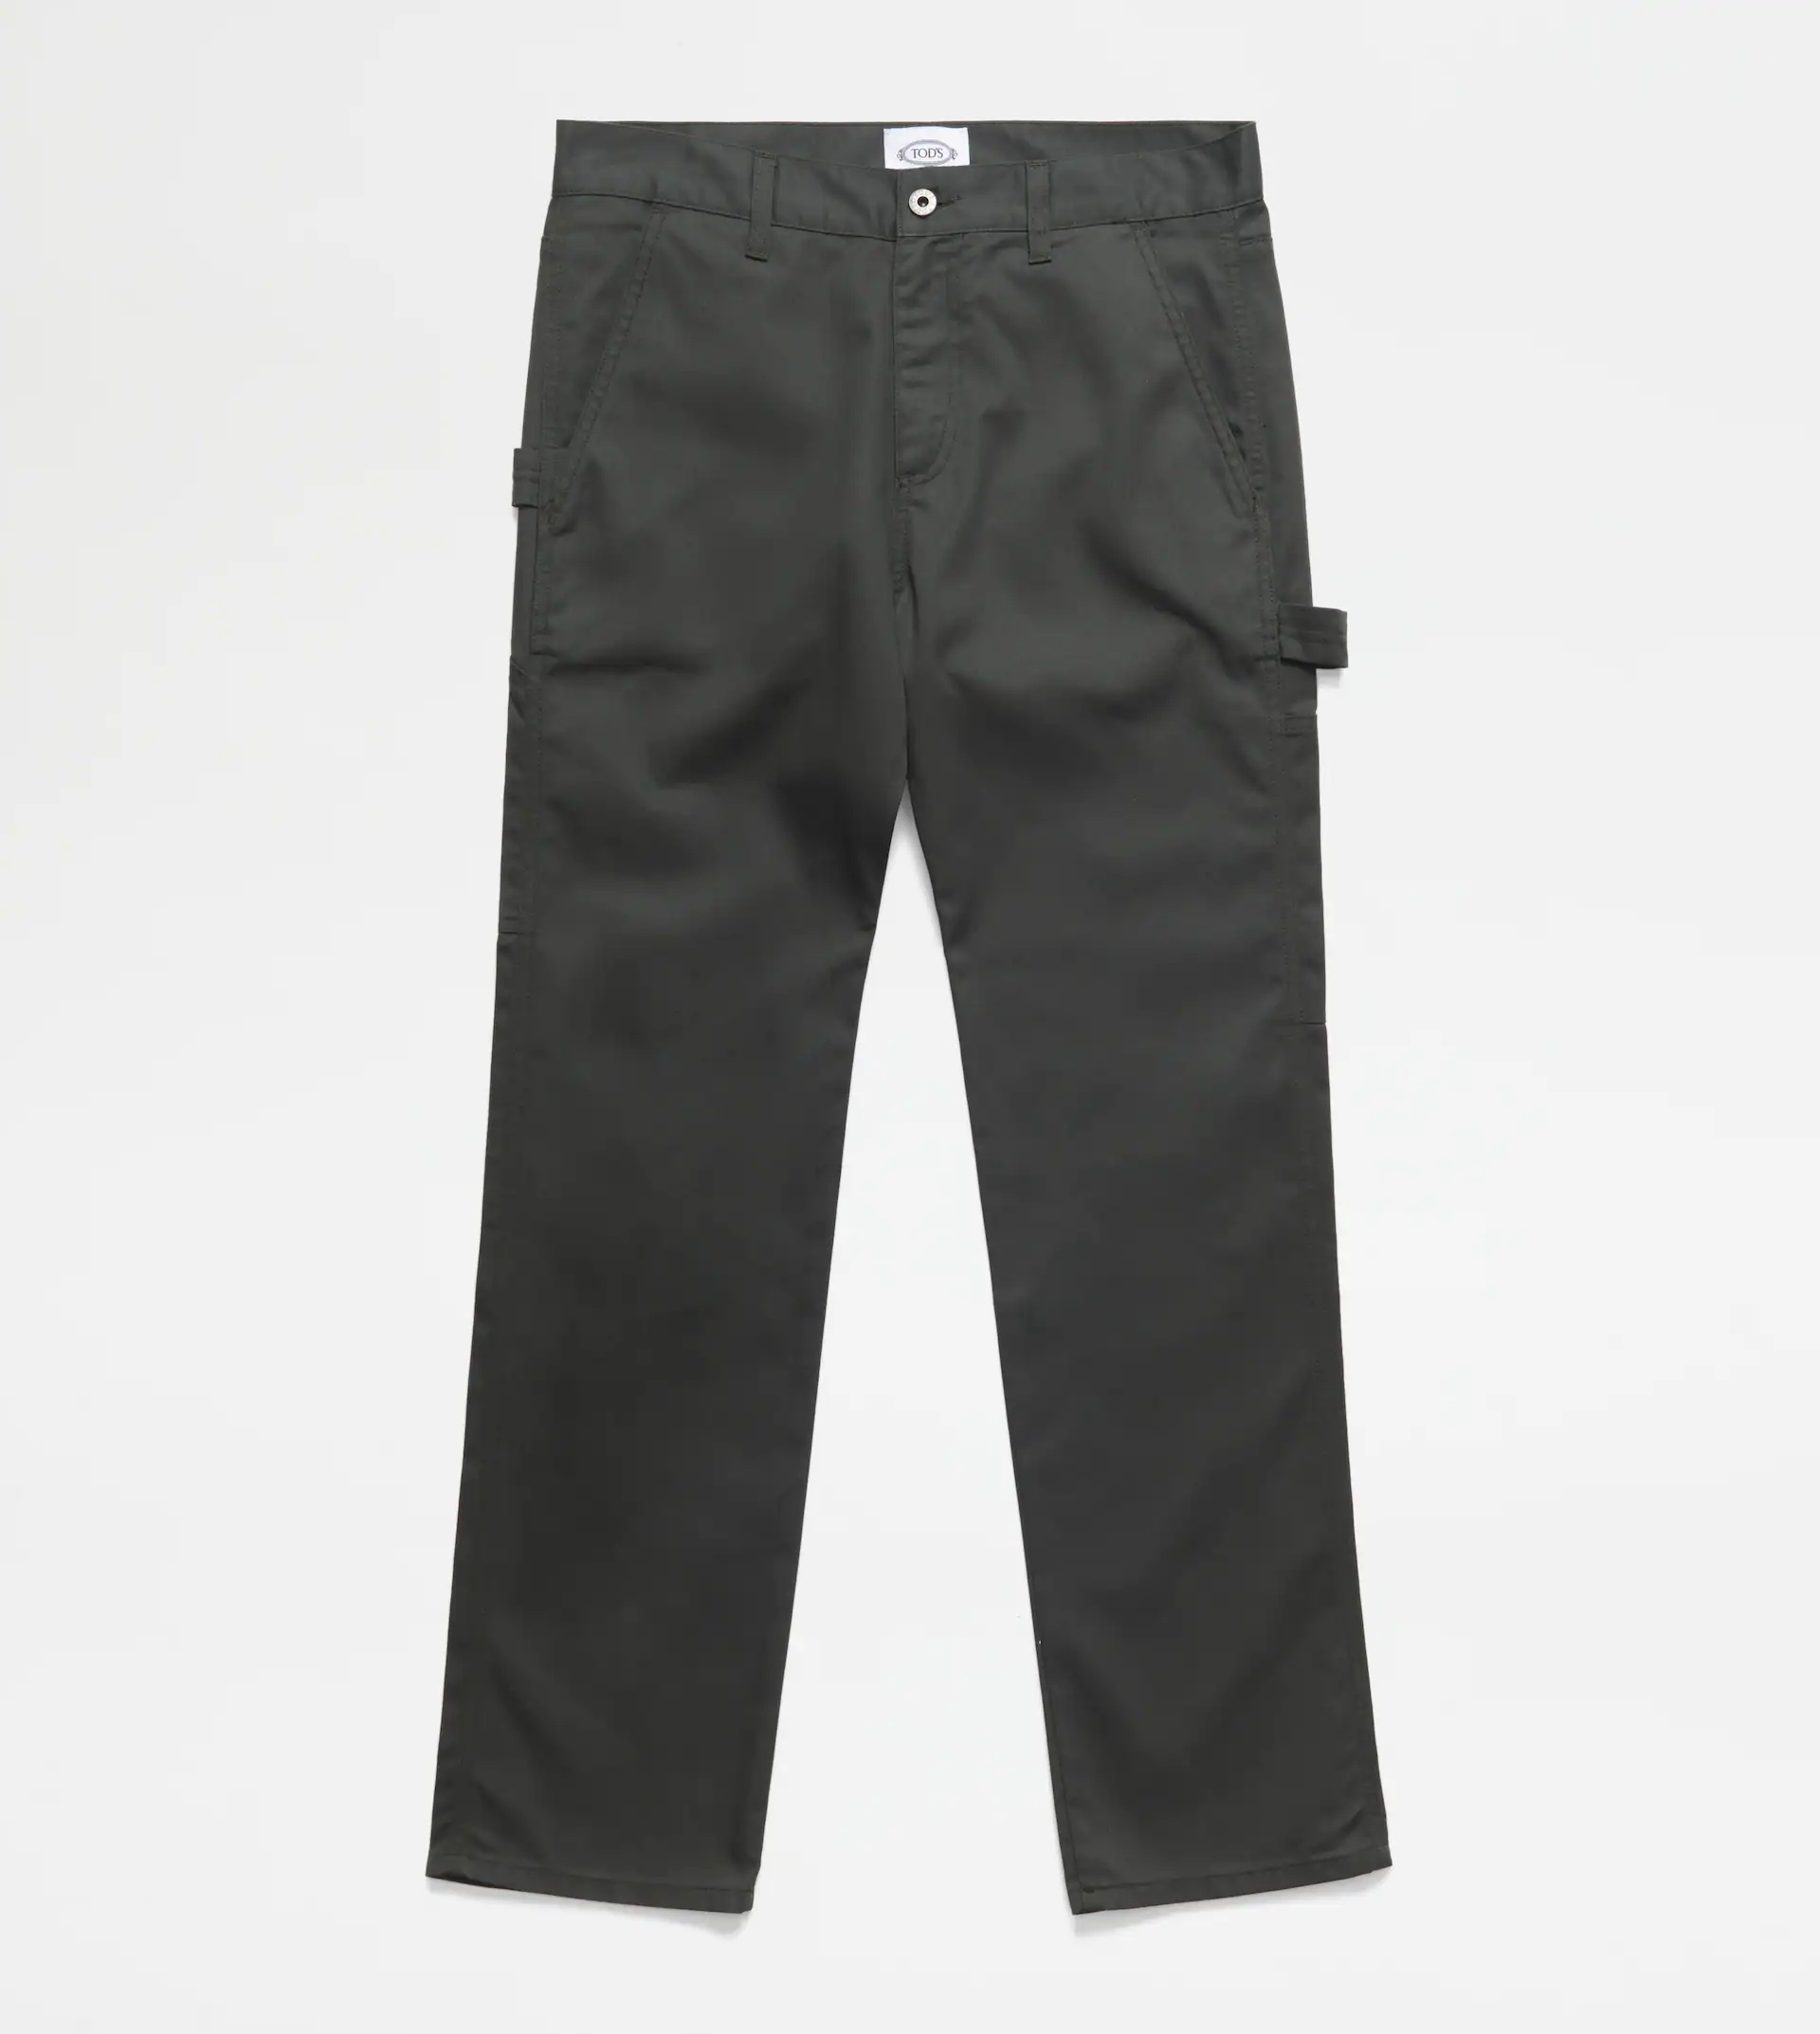 TROUSERS - BROWN - 1